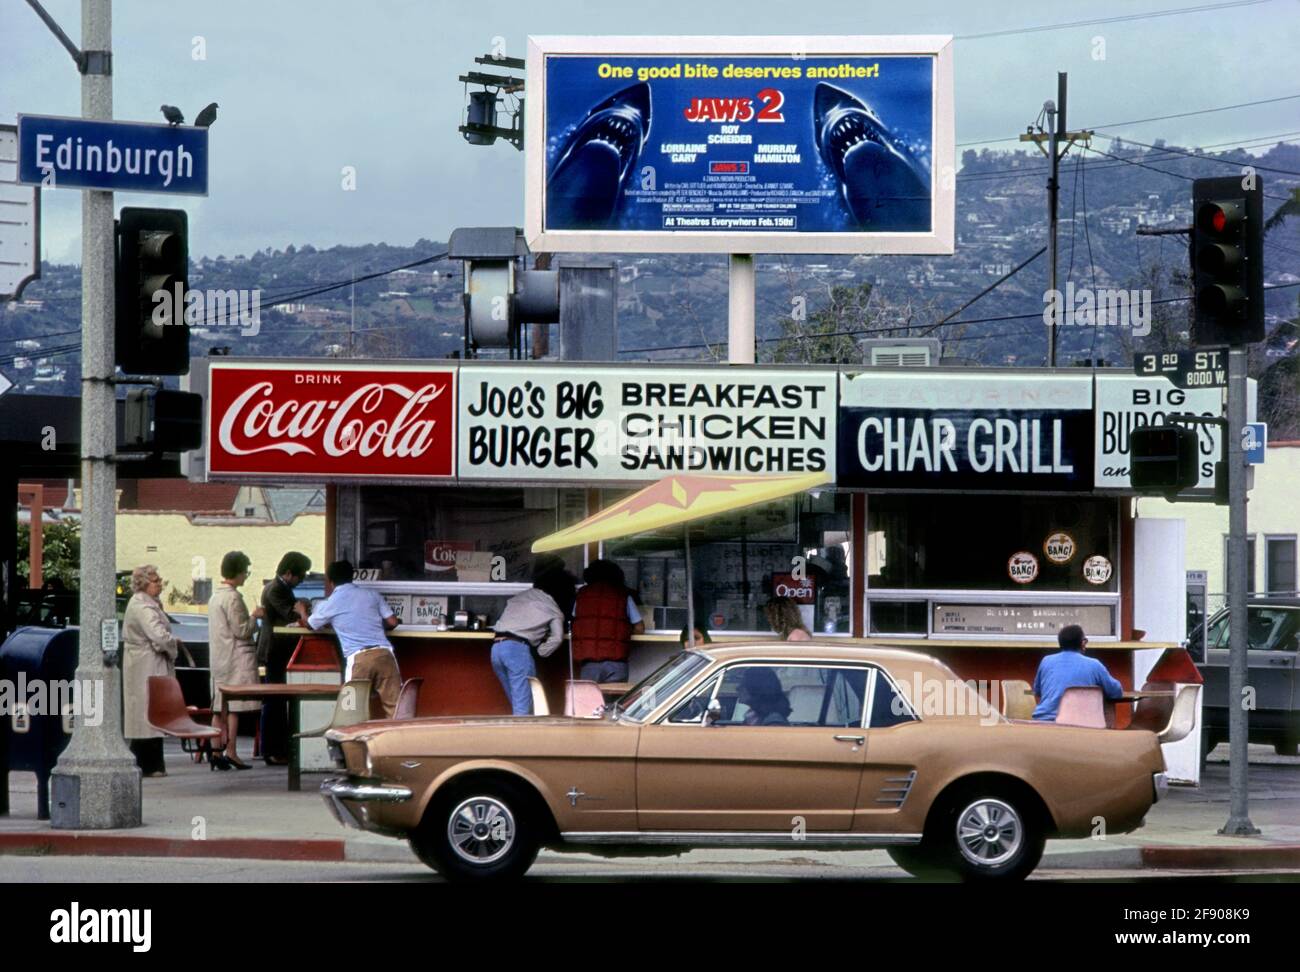 A classic 1965 Ford Mustang passes in front of Joe's Big Burger at Edinburgh and 3rd Street near the Farmers Market in Los Angeles, CA Stock Photo